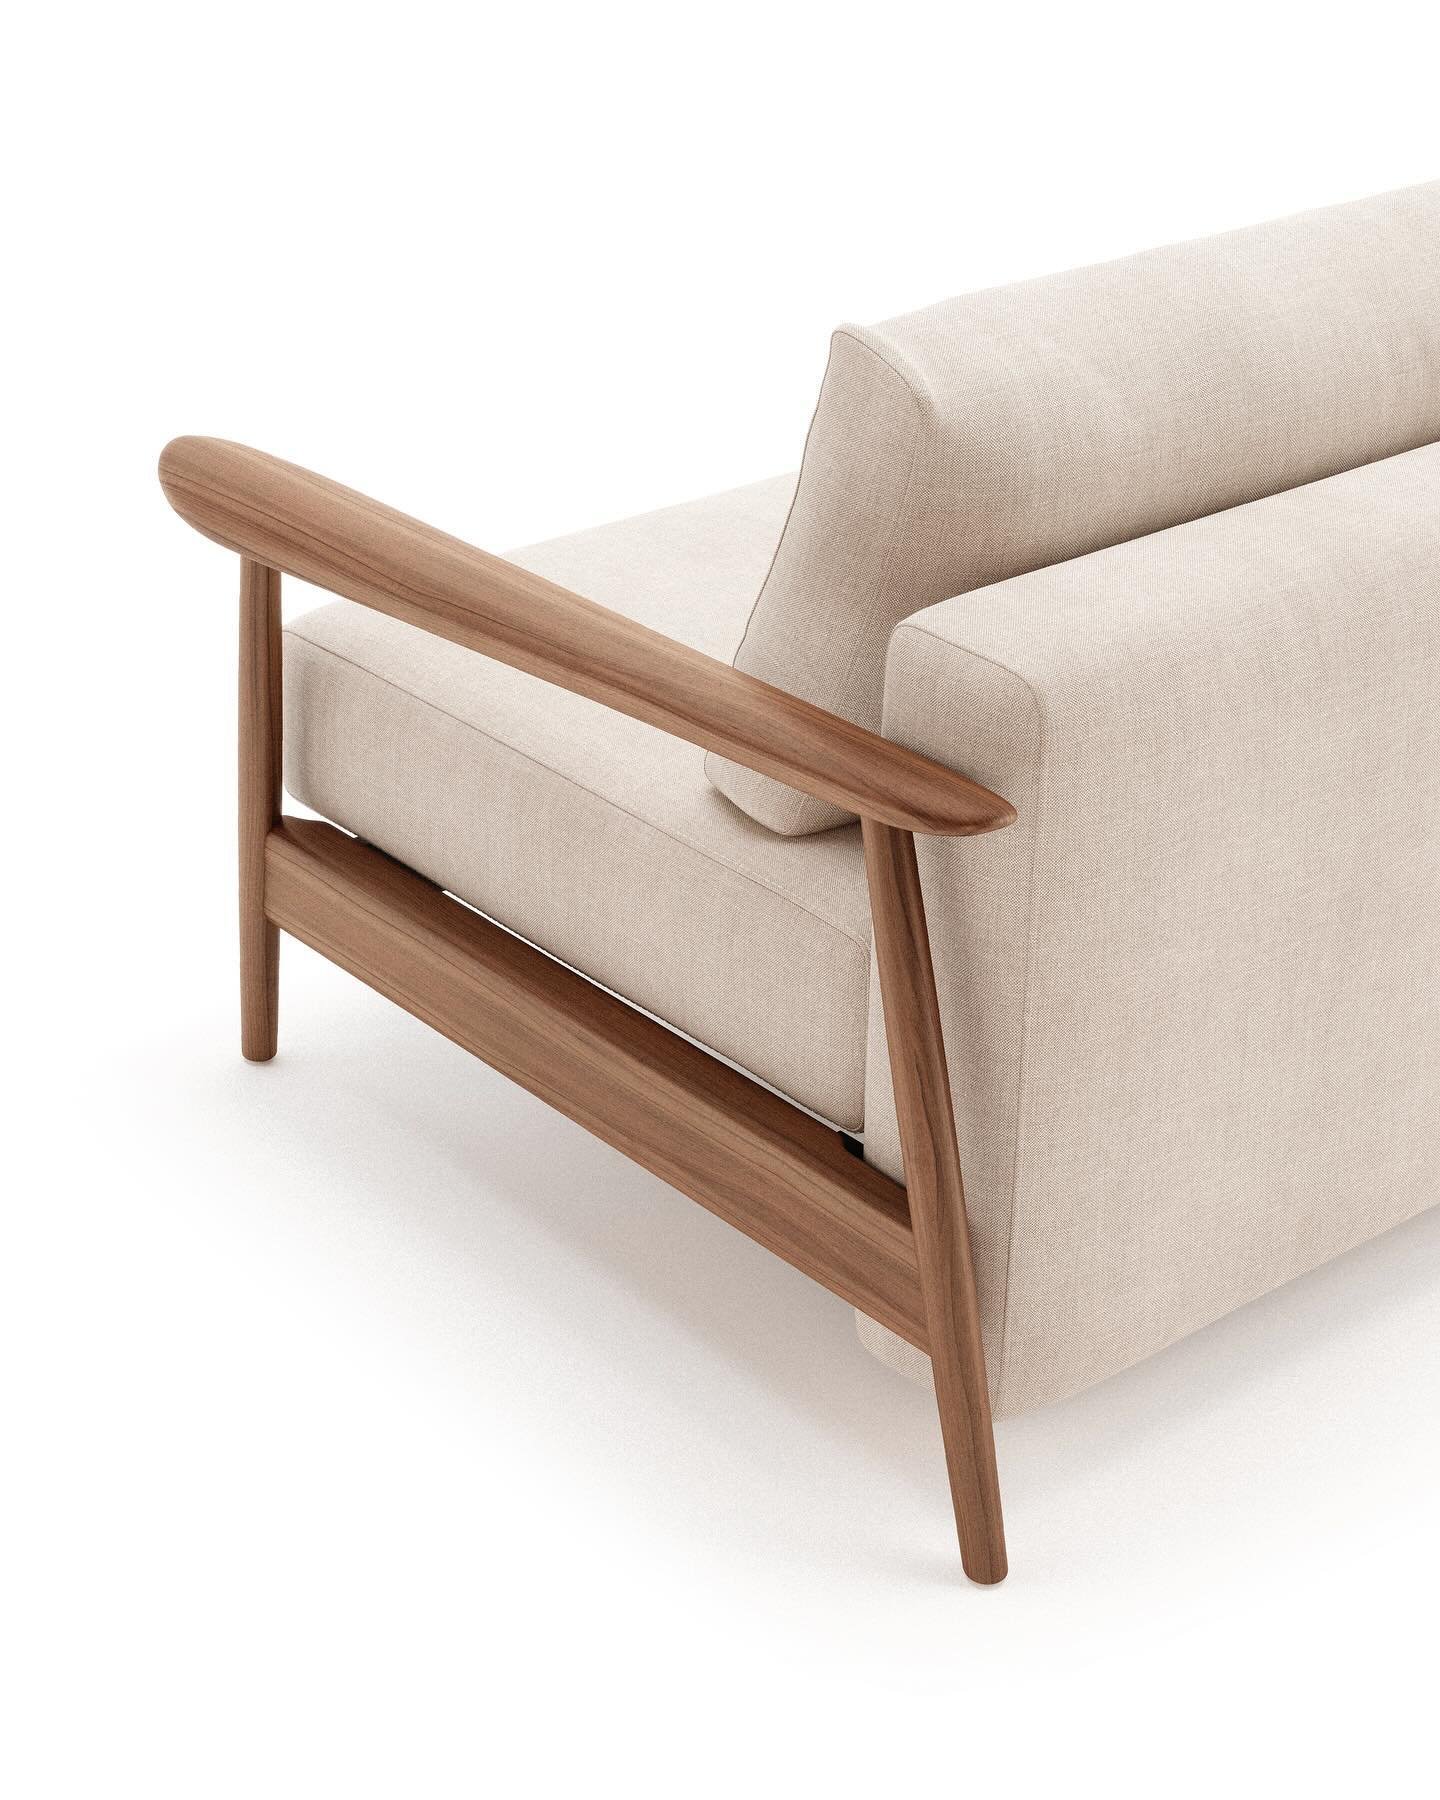 Caluma arm designed for Innovation Living. This design is deeply influenced by our Danish heritage, with a strong emphasis on woodworking and aesthetic principles. During the design process, our priority was to craft an armrest that is both functiona